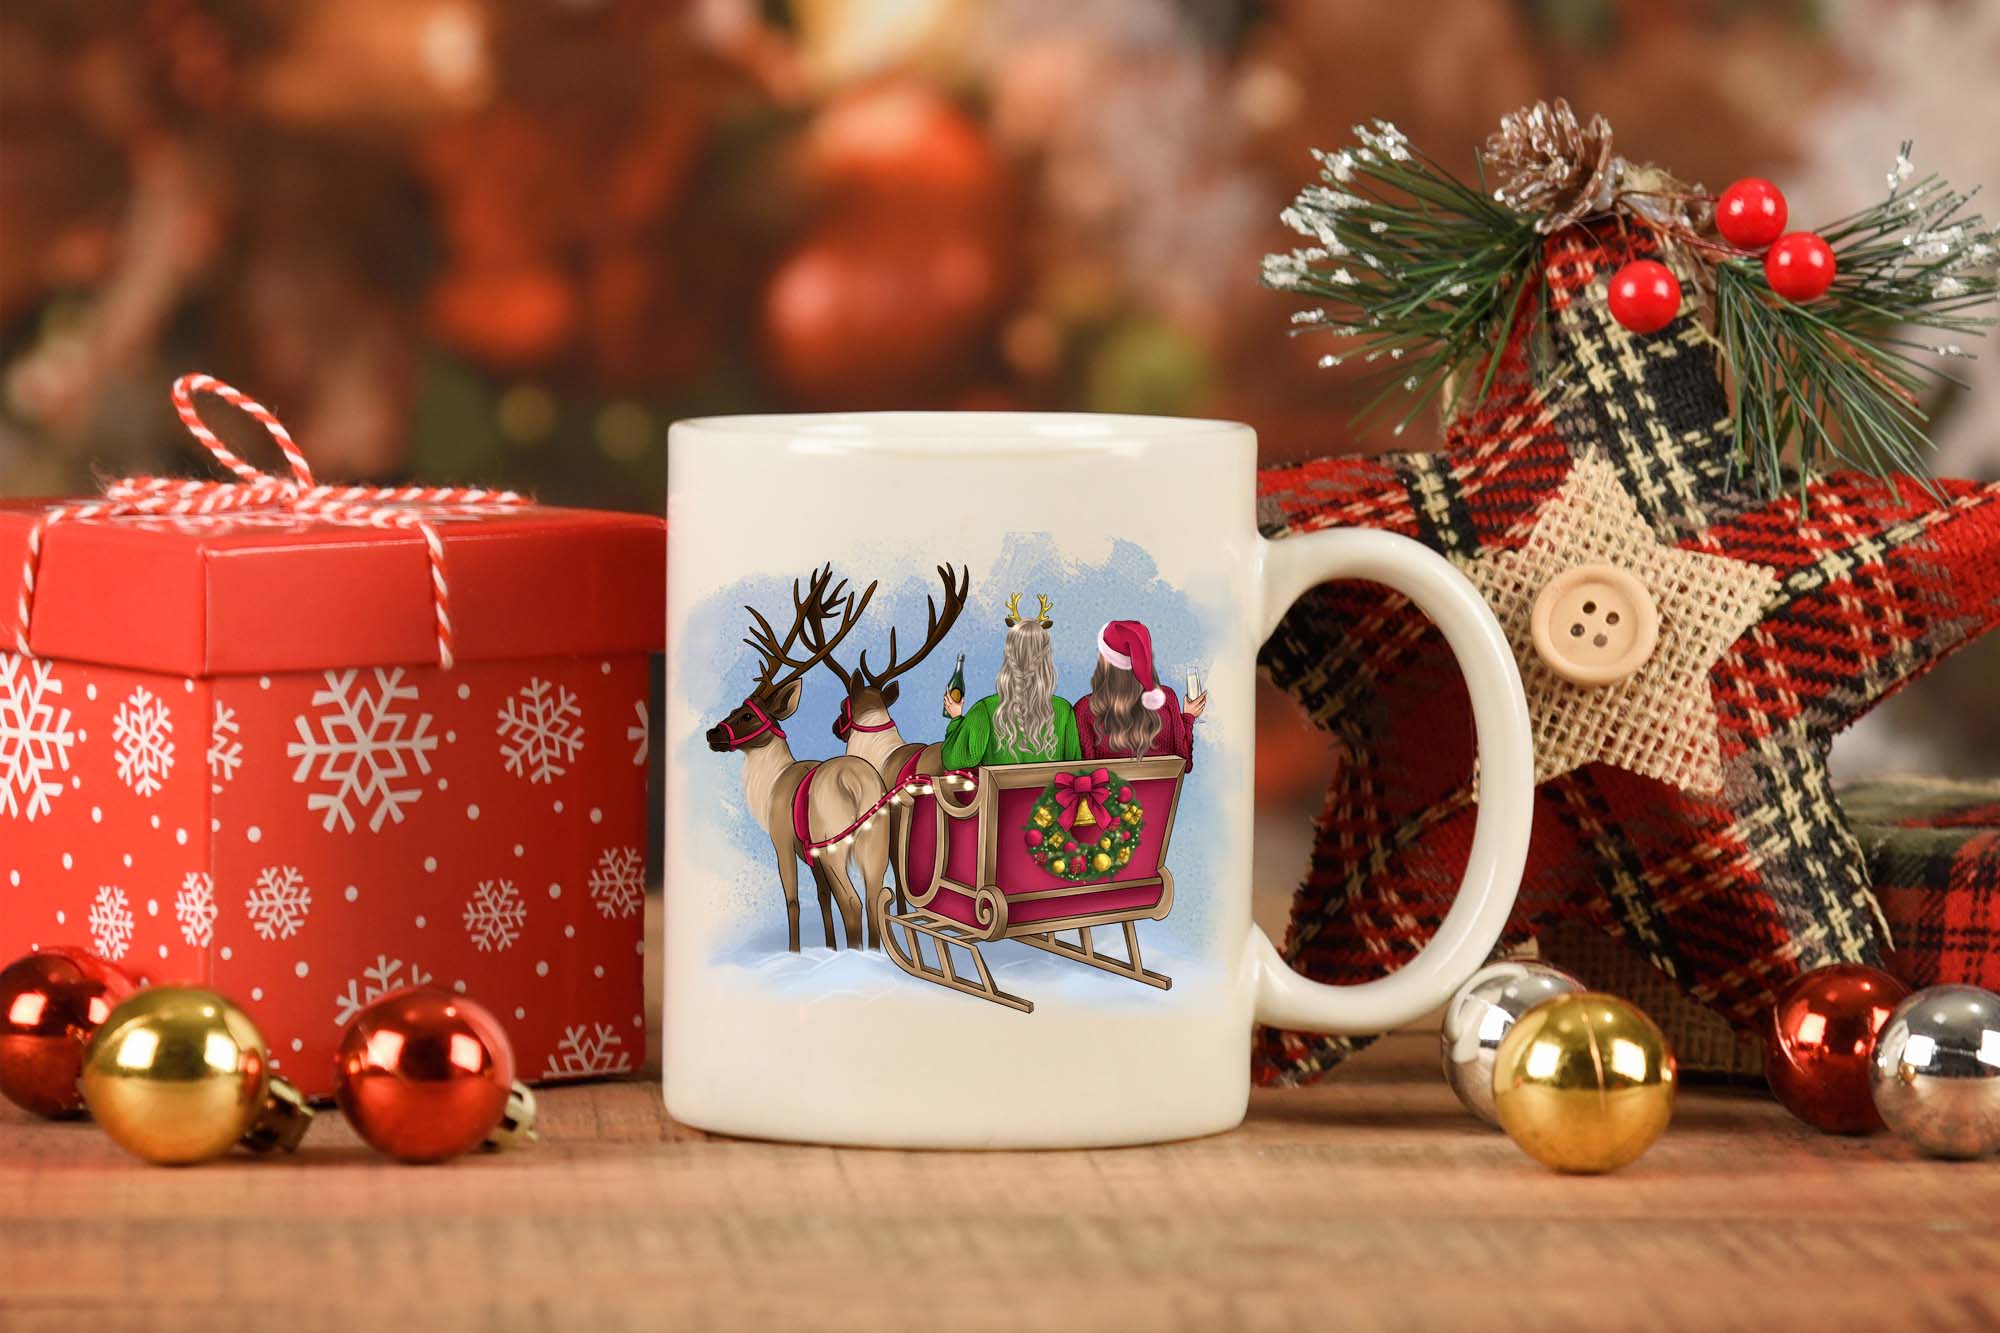 Friends in a Sleigh with Reindeer for mug design.